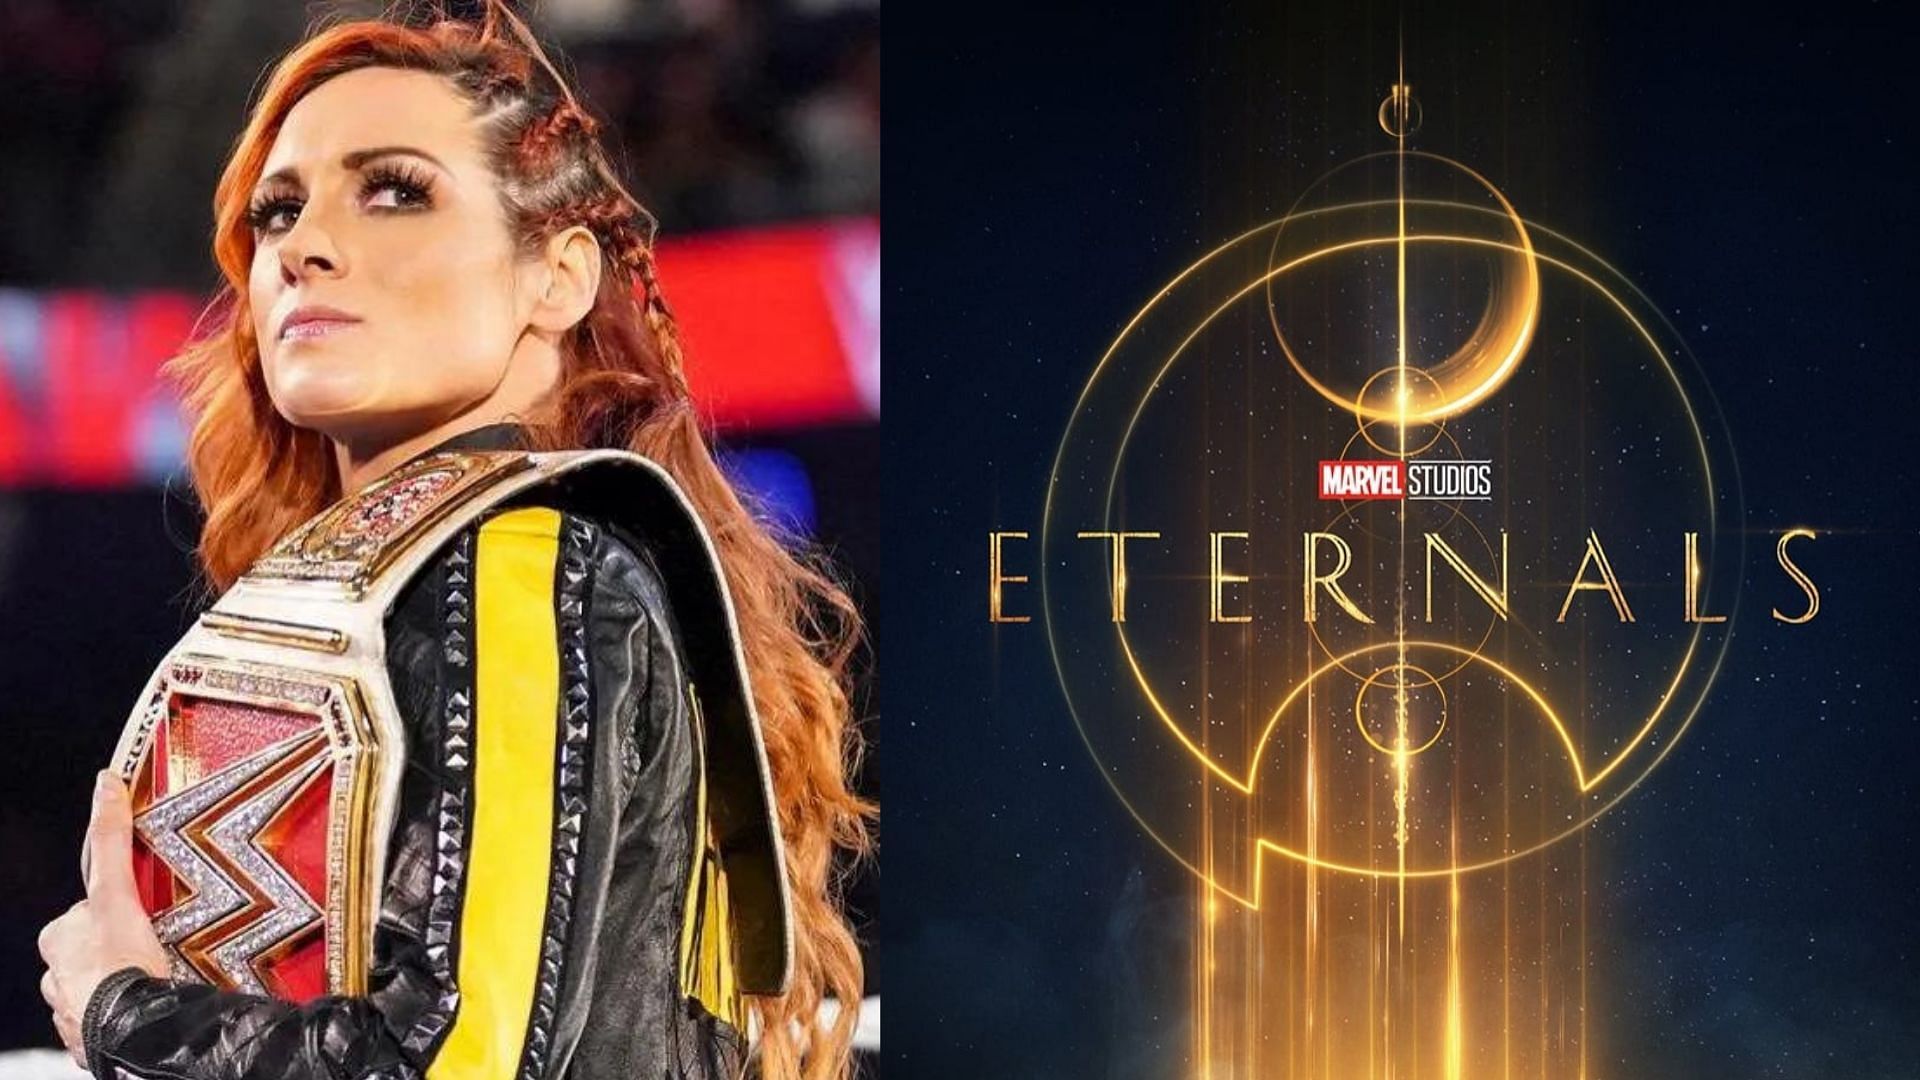 Becky Lynch was slated to appear for Marvel